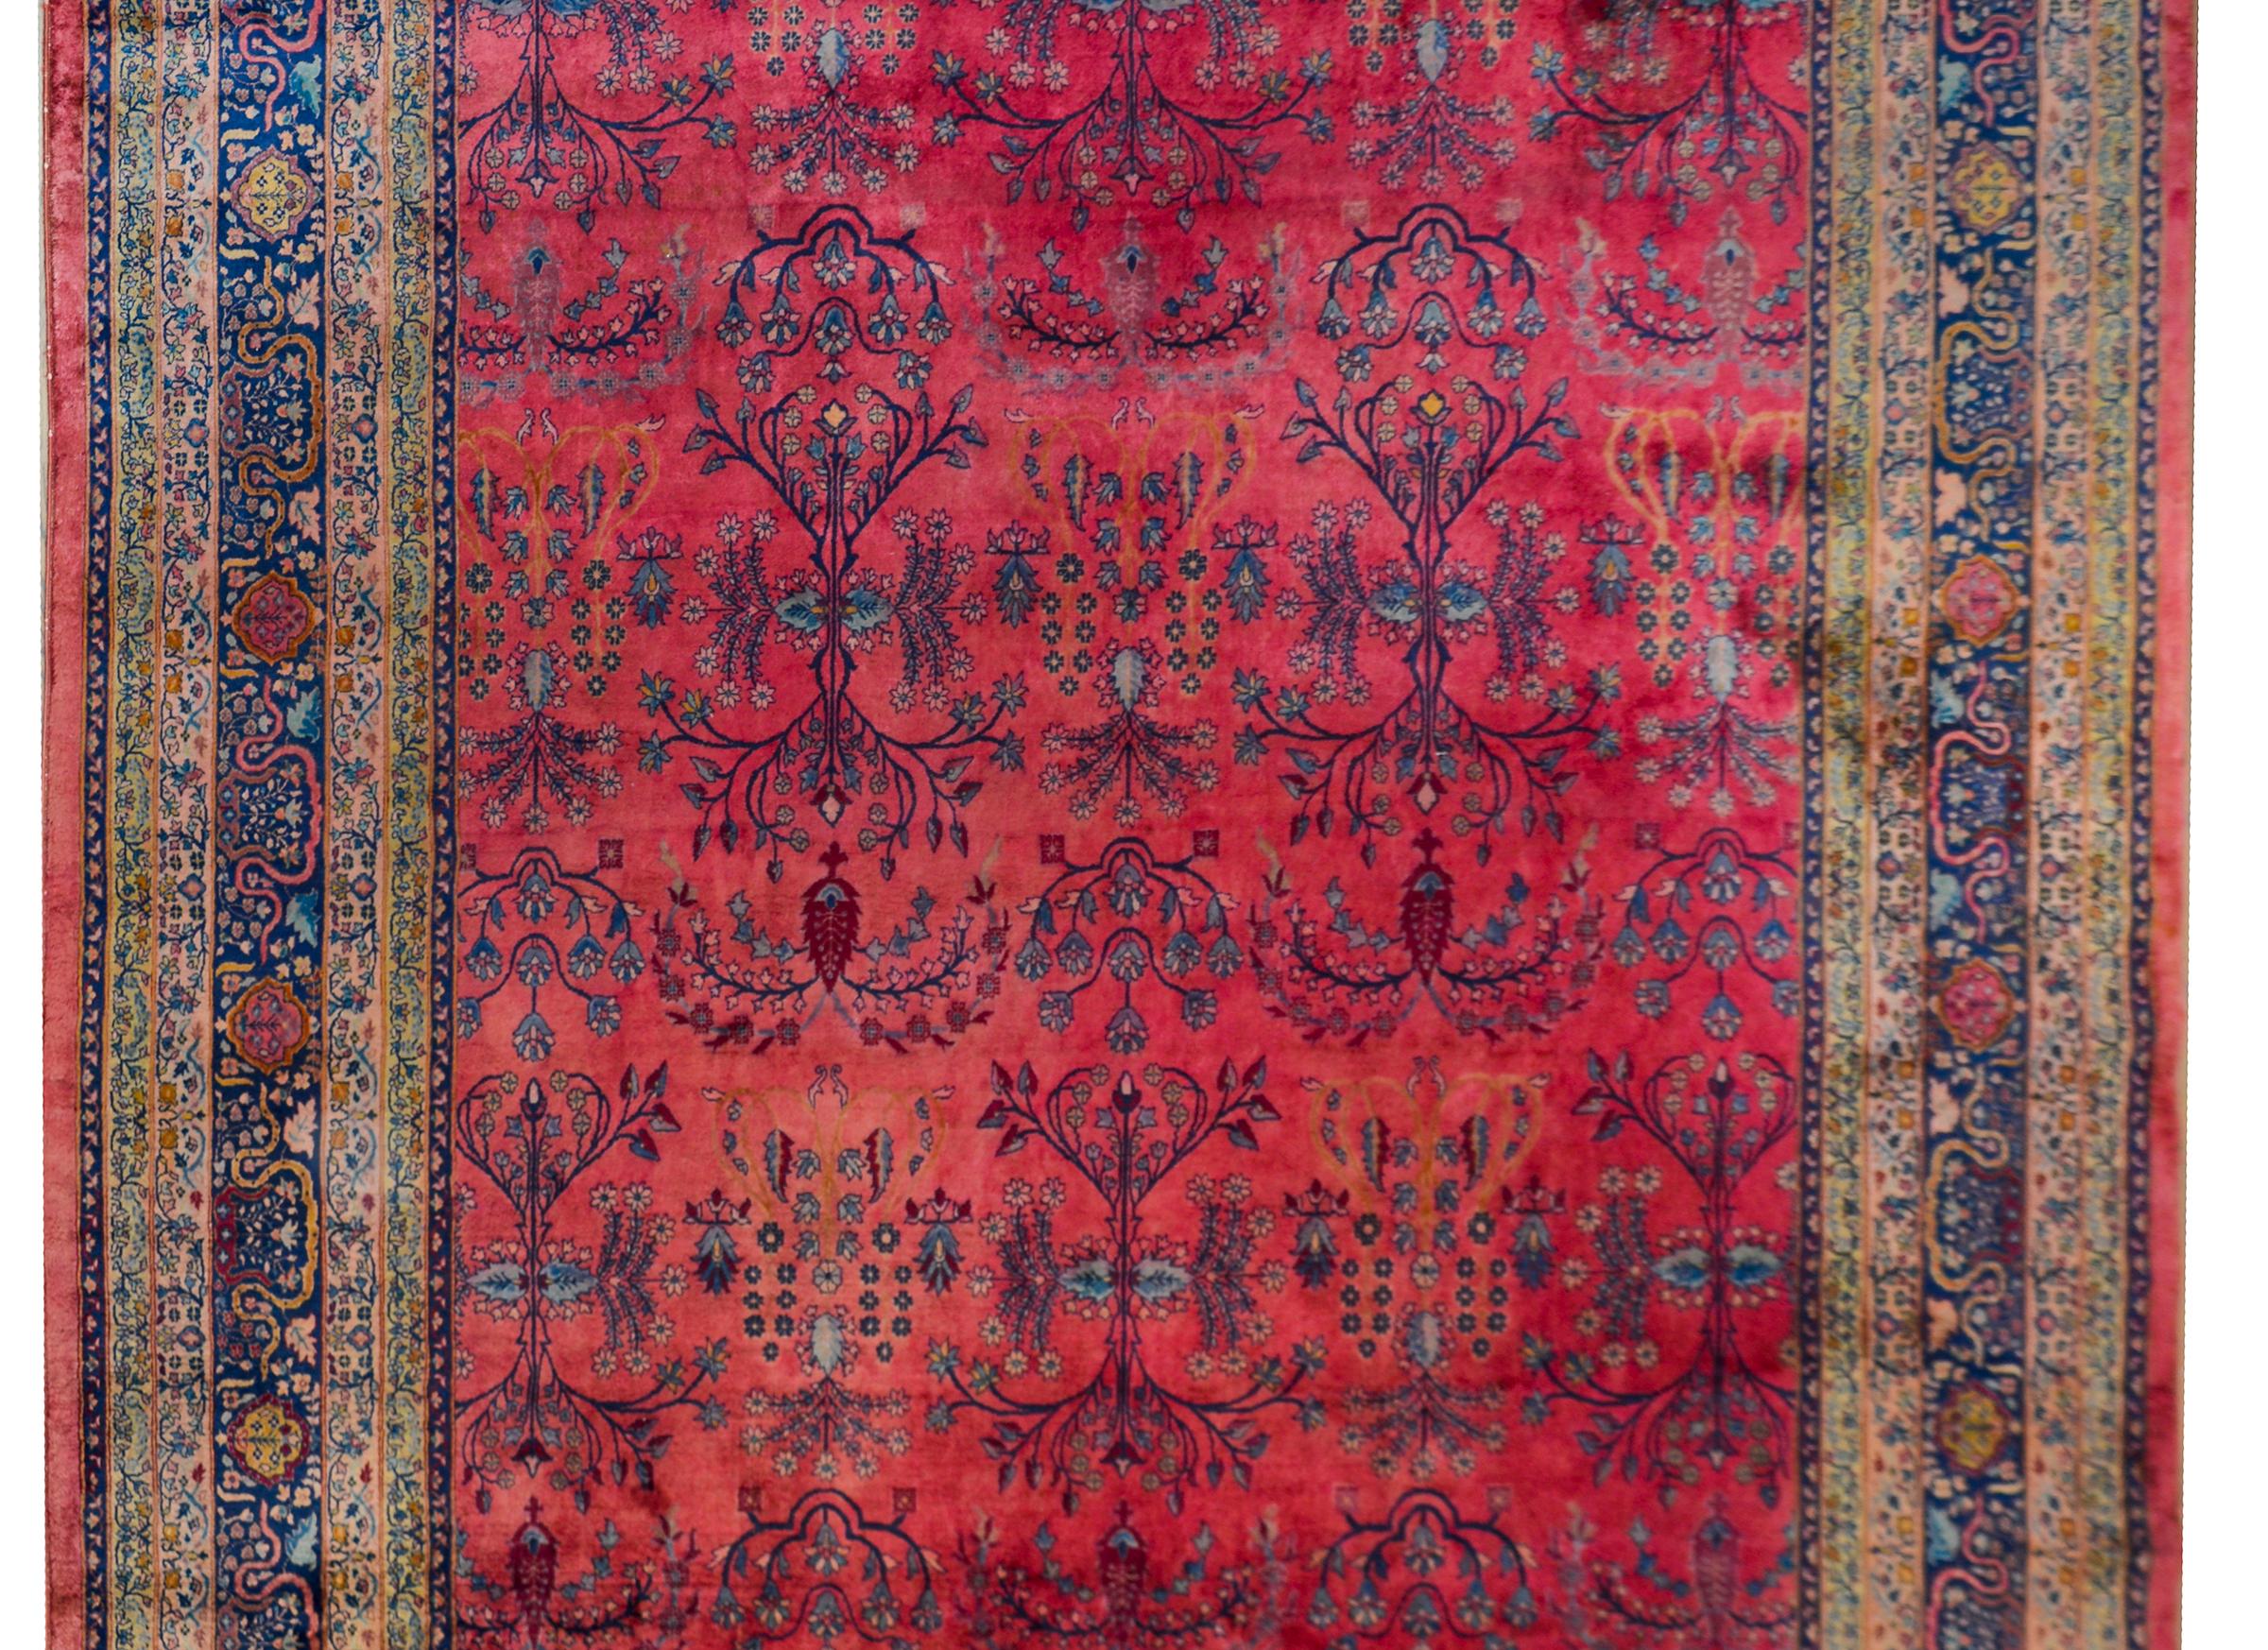 A stunning early 20th century Indian Larestan rug with a whisky floral and vine pattern woven in light and dark indigo, cream, and pink set against an abrash fuchsia background. The border is complex with multiple narrow borders with petite floral